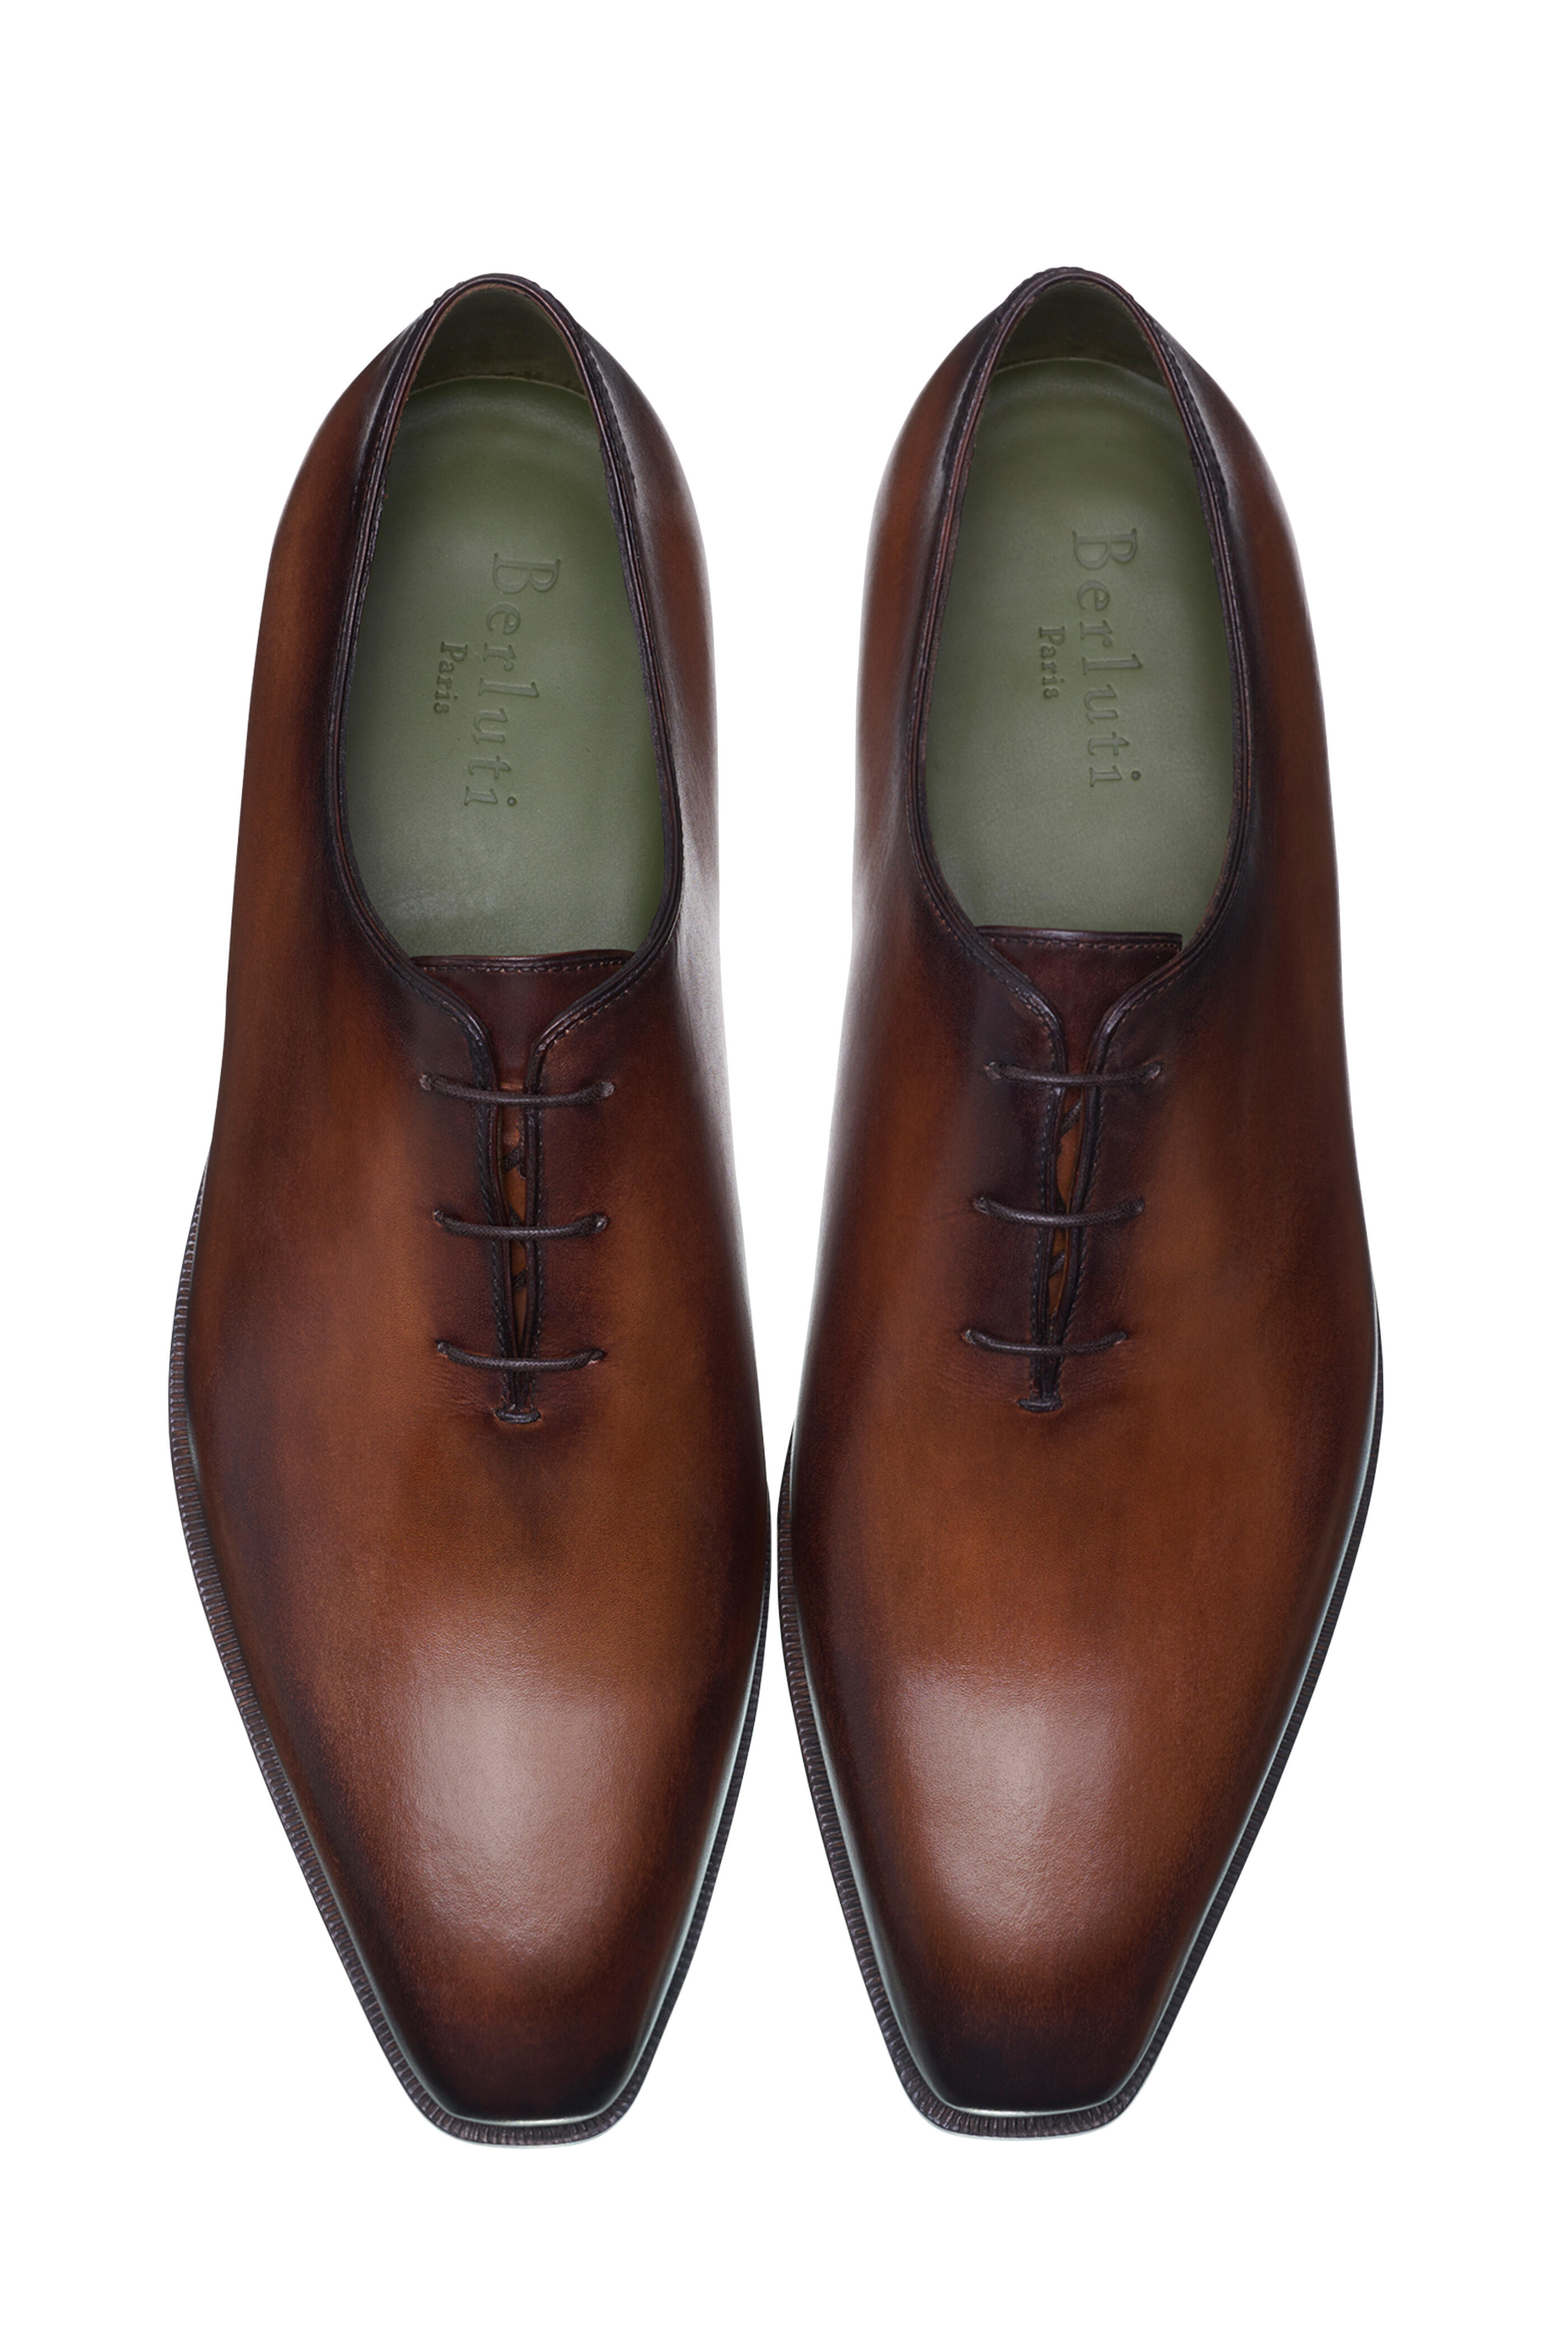 Why is it expensive: The Berluti Alessandro leather shoes